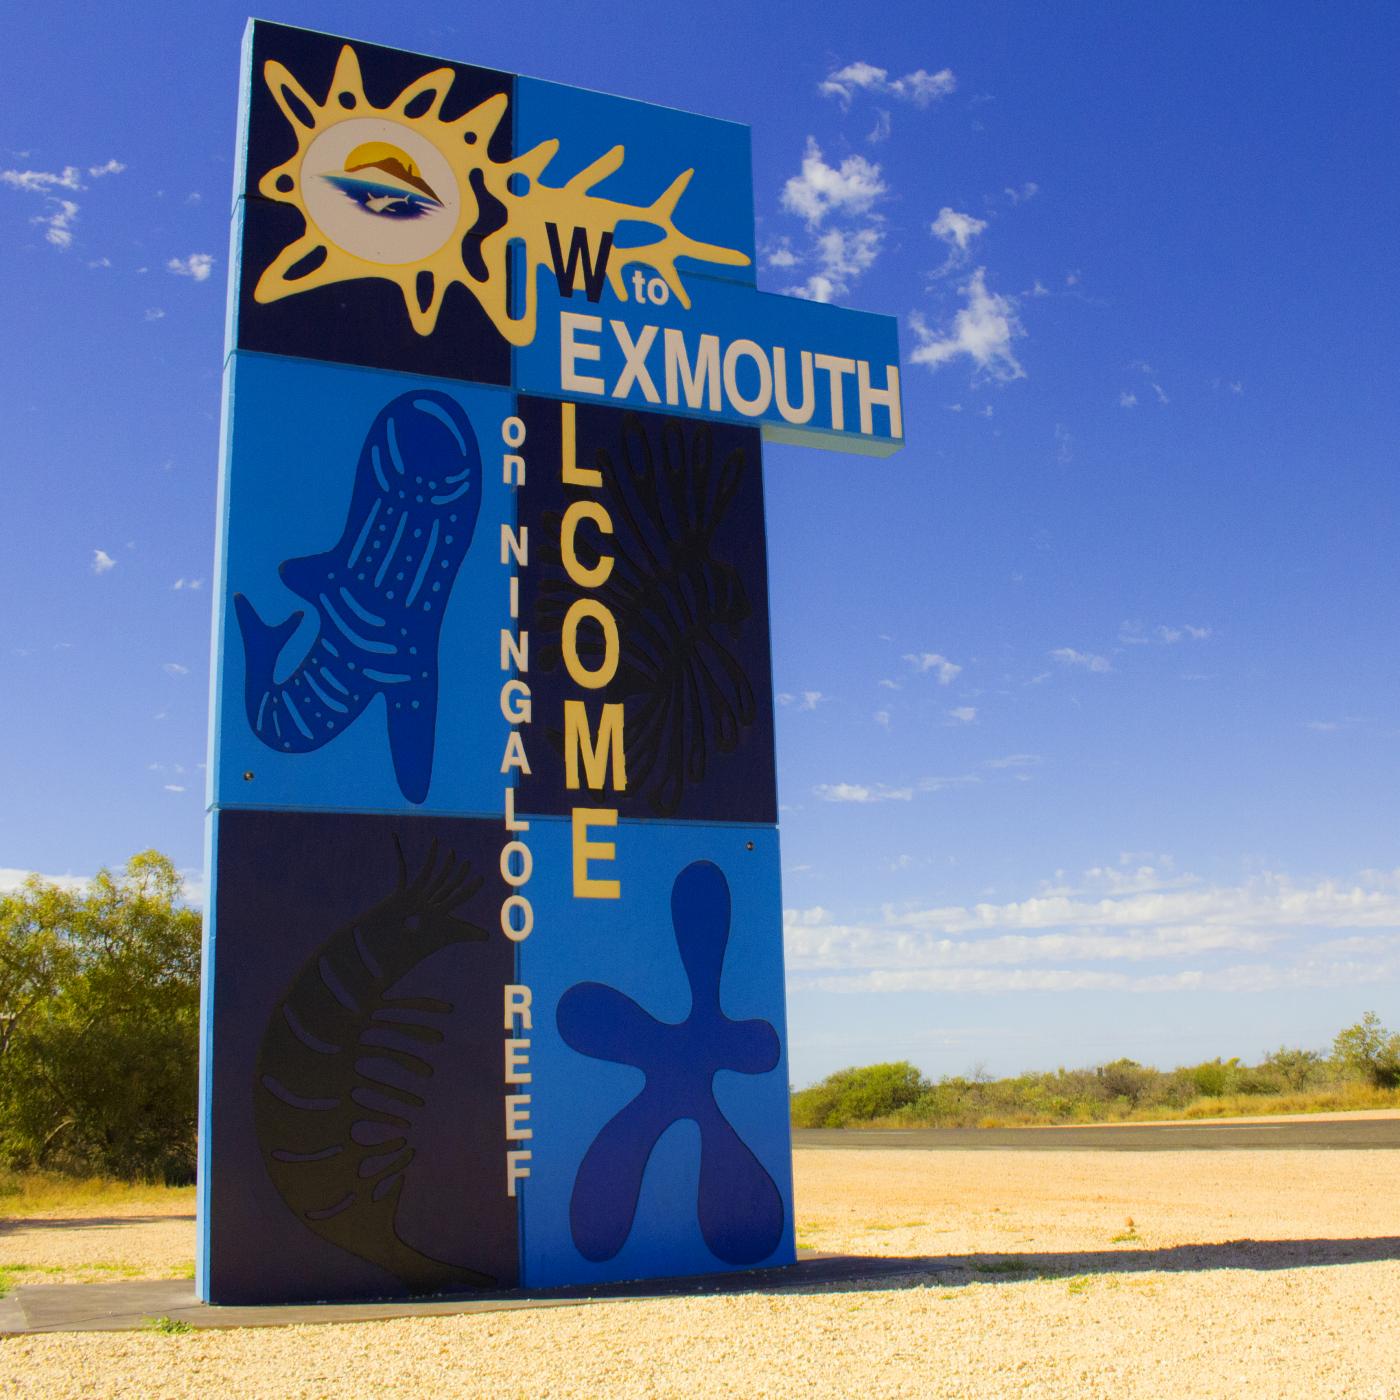 The 'welcome to Exmouth sign'